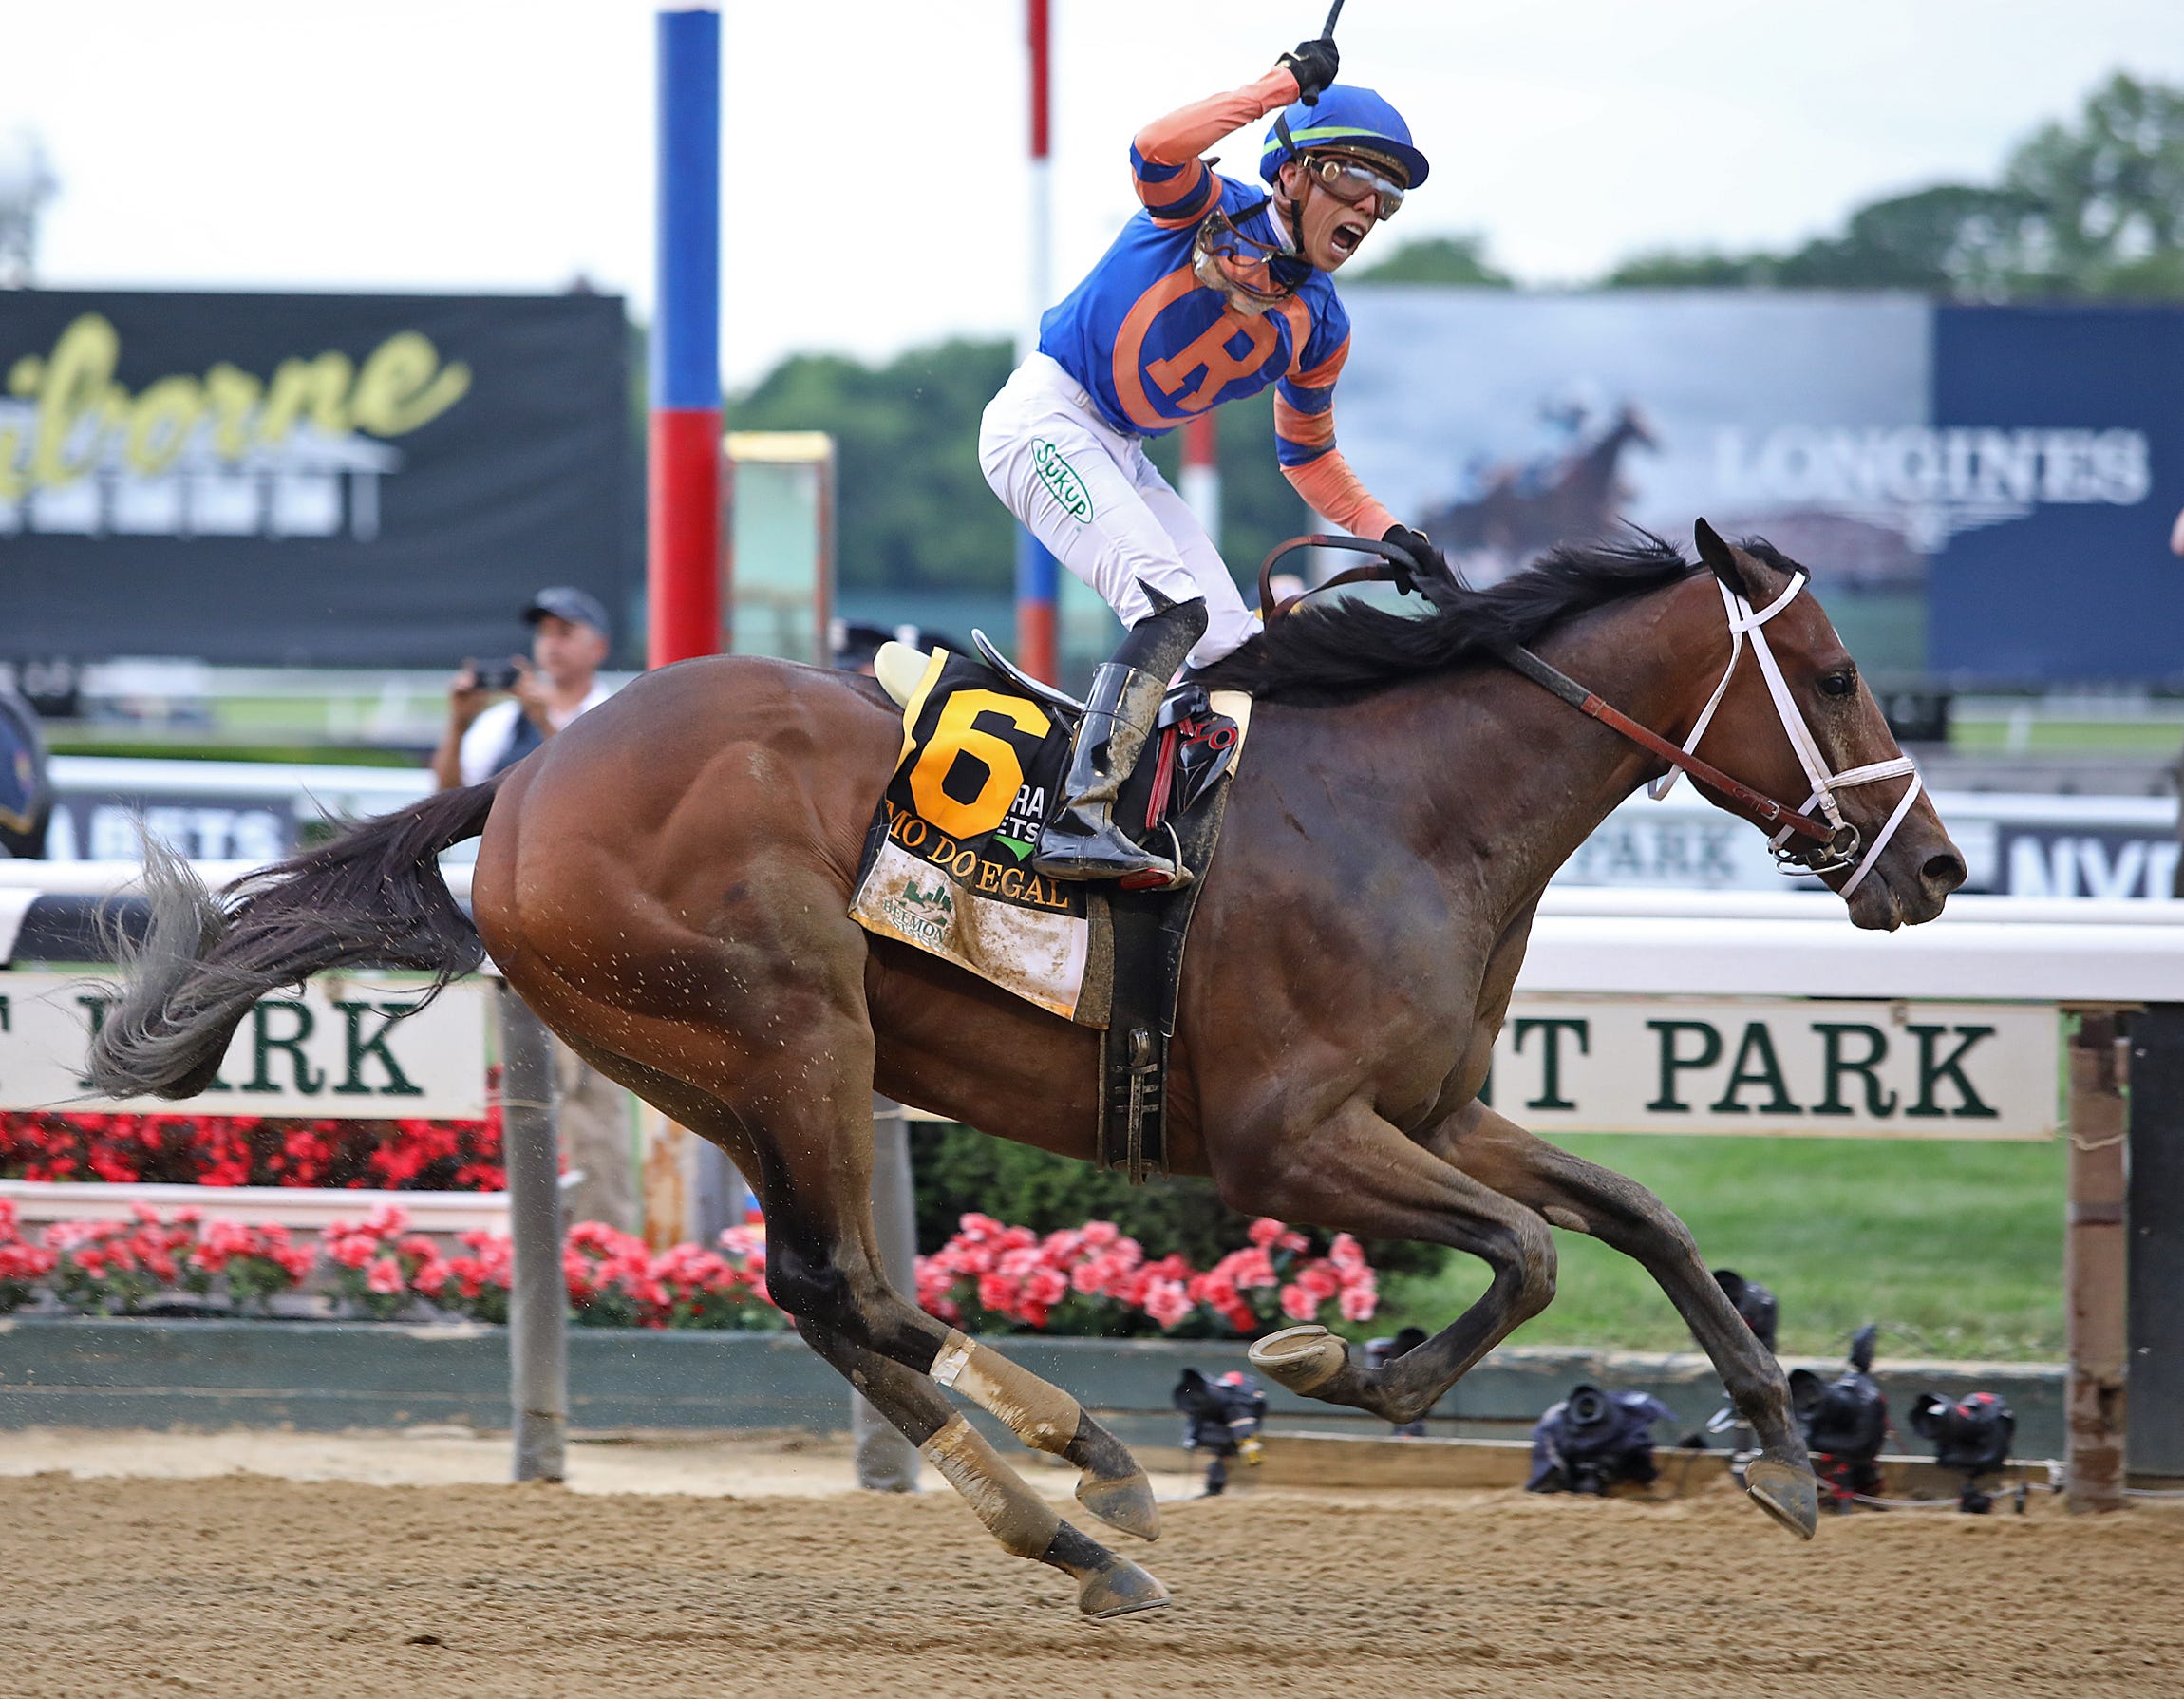 Belmont Stakes 2022 results and payouts